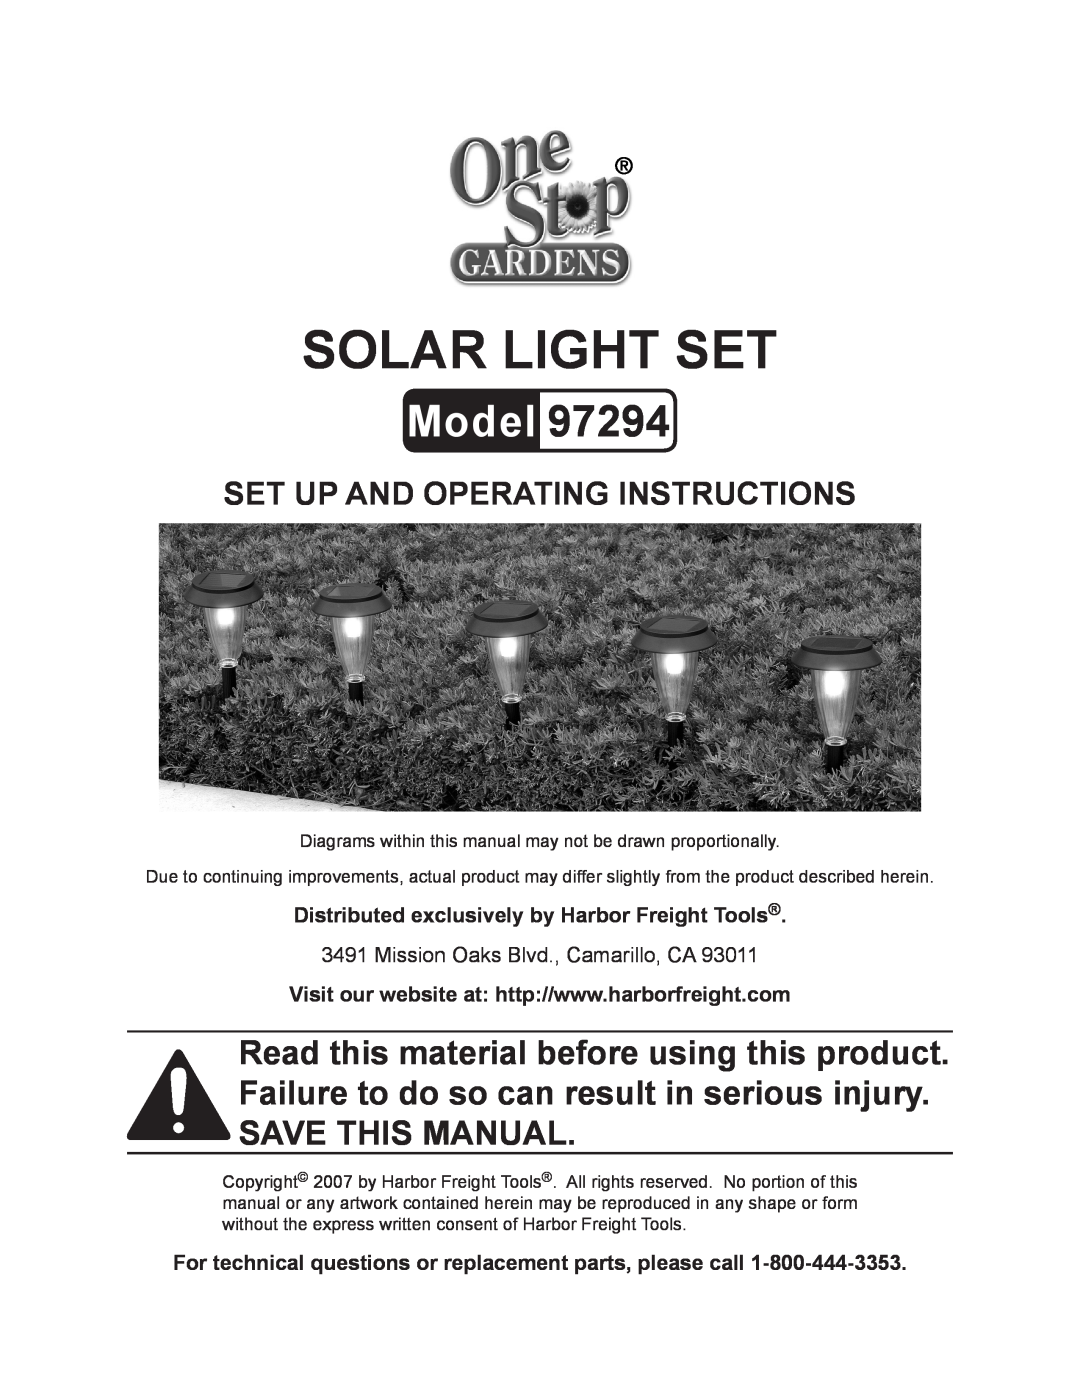 Harbor Freight Tools 97294 manual Solar light set, Model, Set up And Operating Instructions 